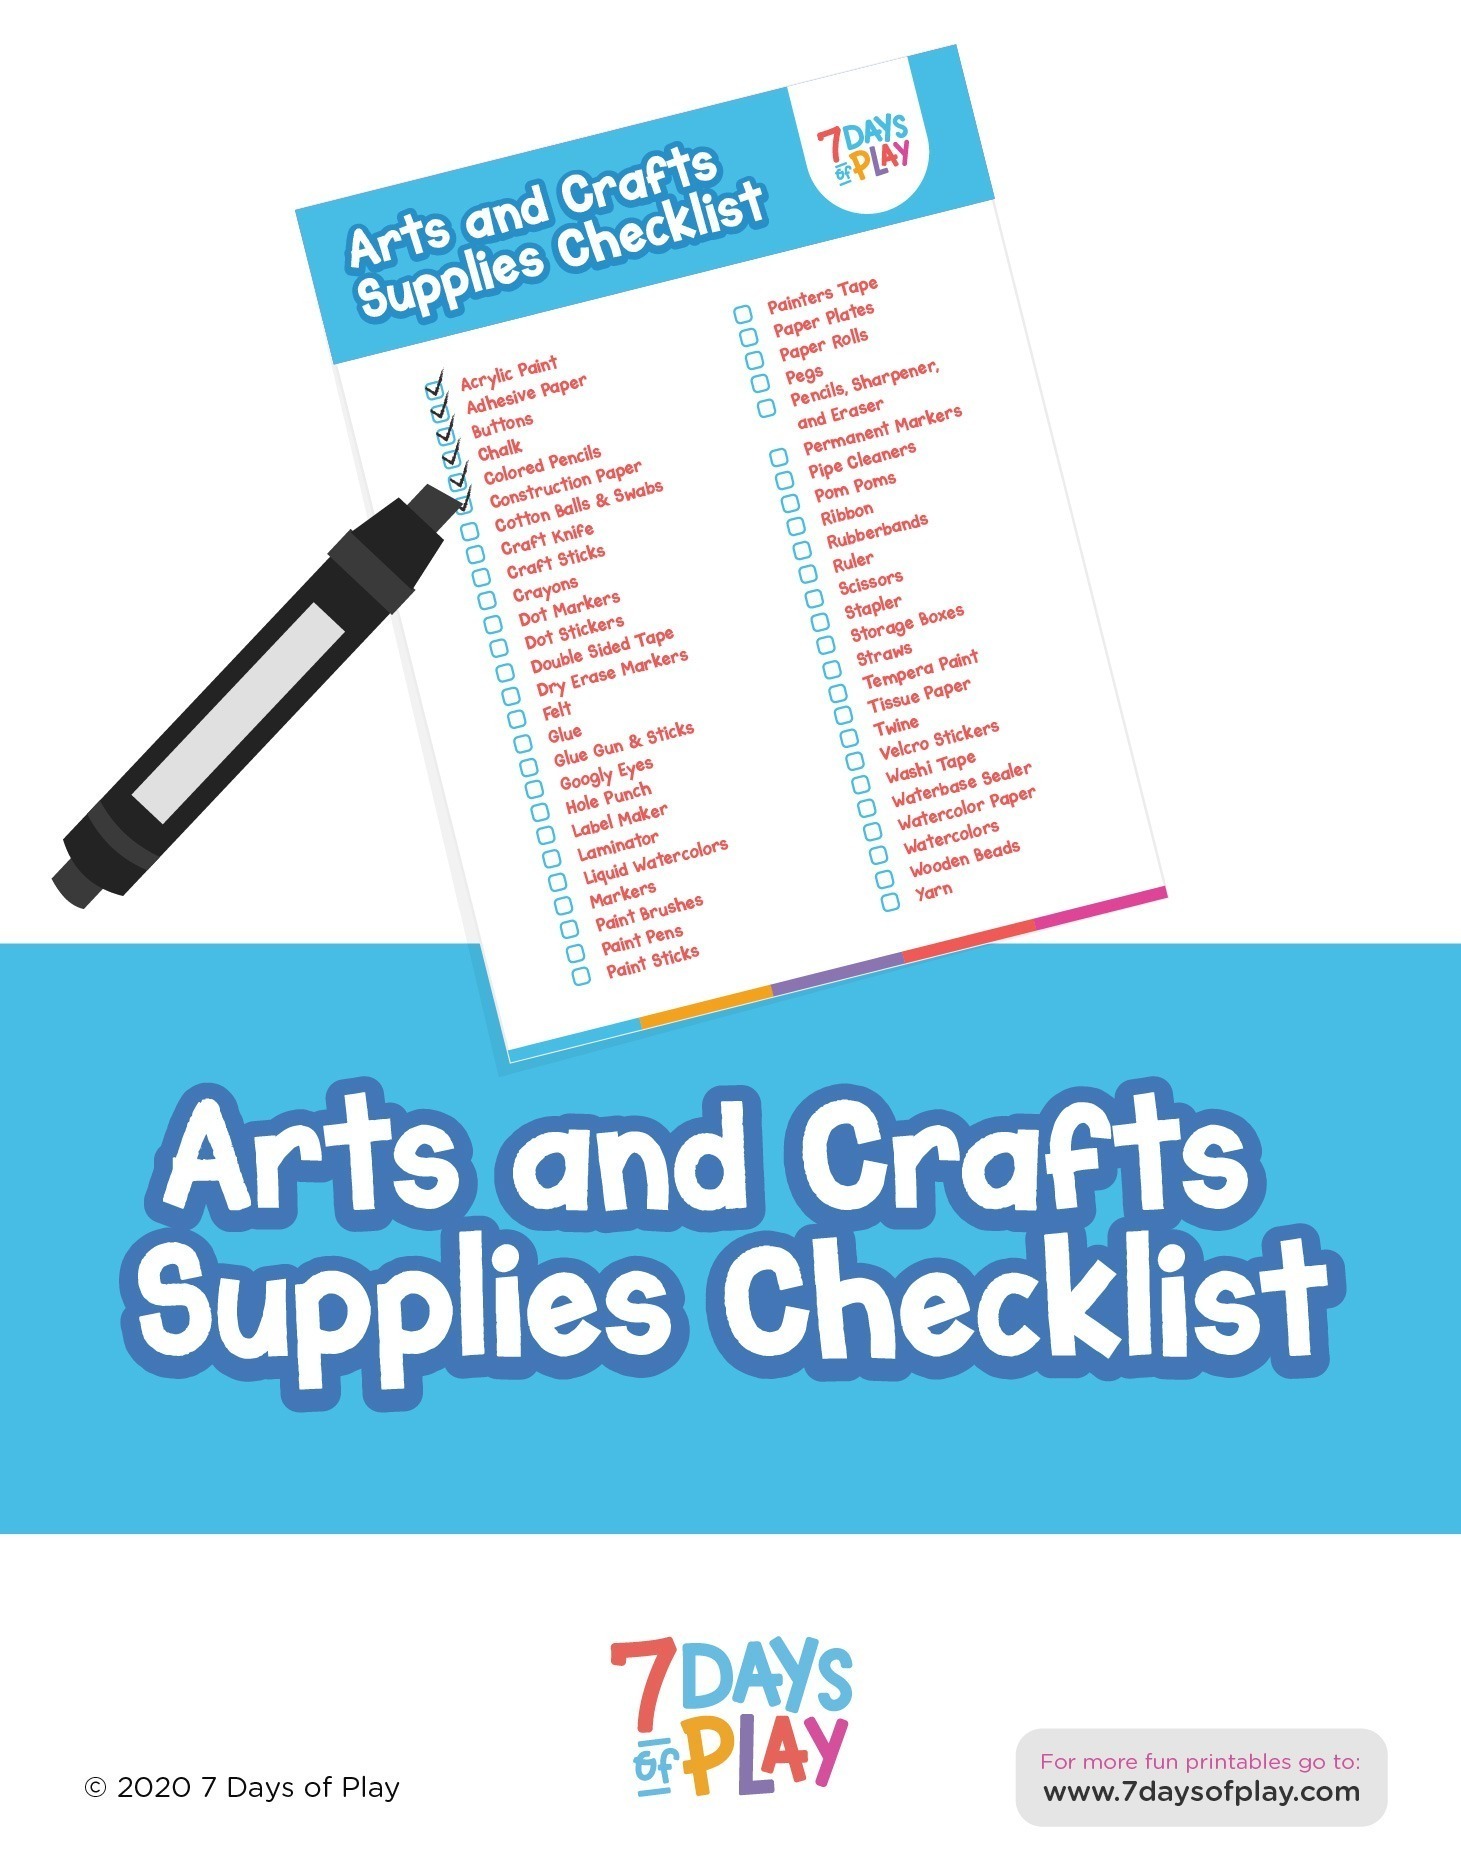 7 Card Making Supplies All Beginners Need, Craftsy